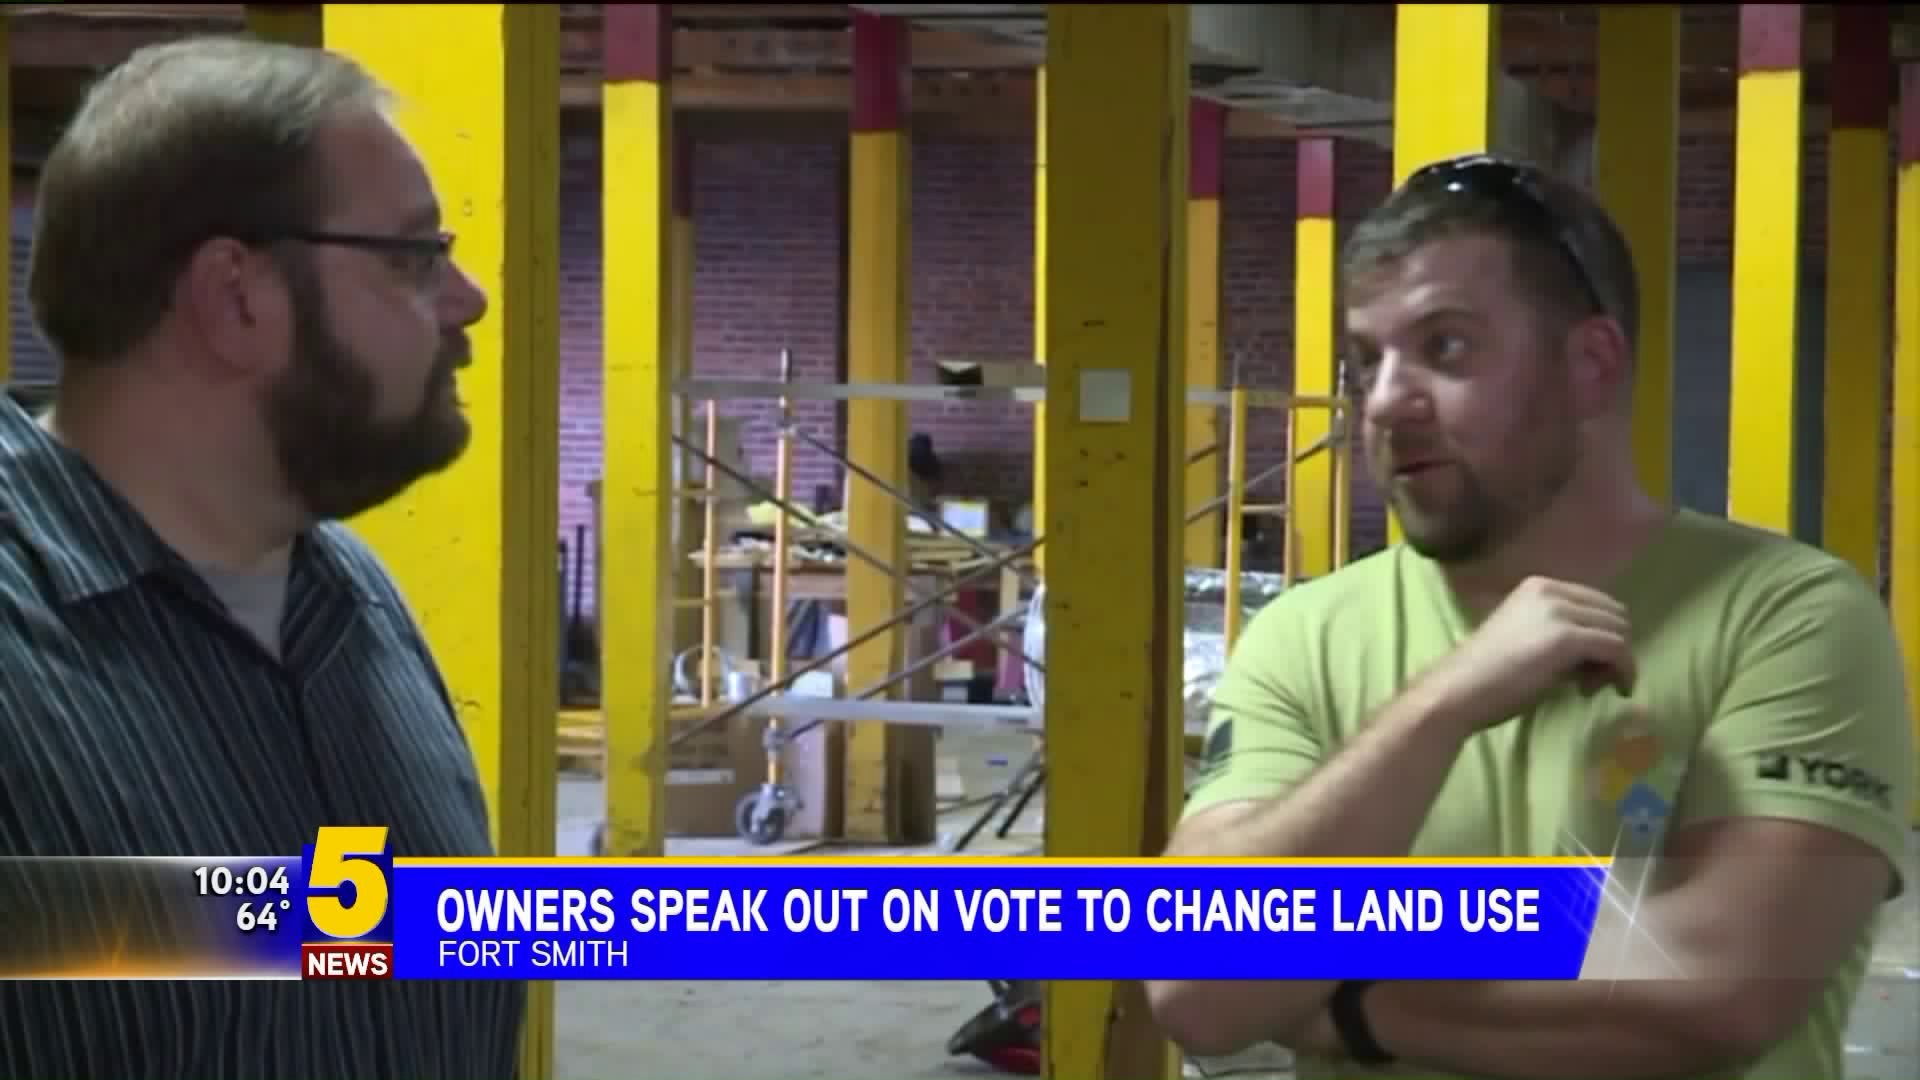 Owners Speak Out On Vote to Change Land Use